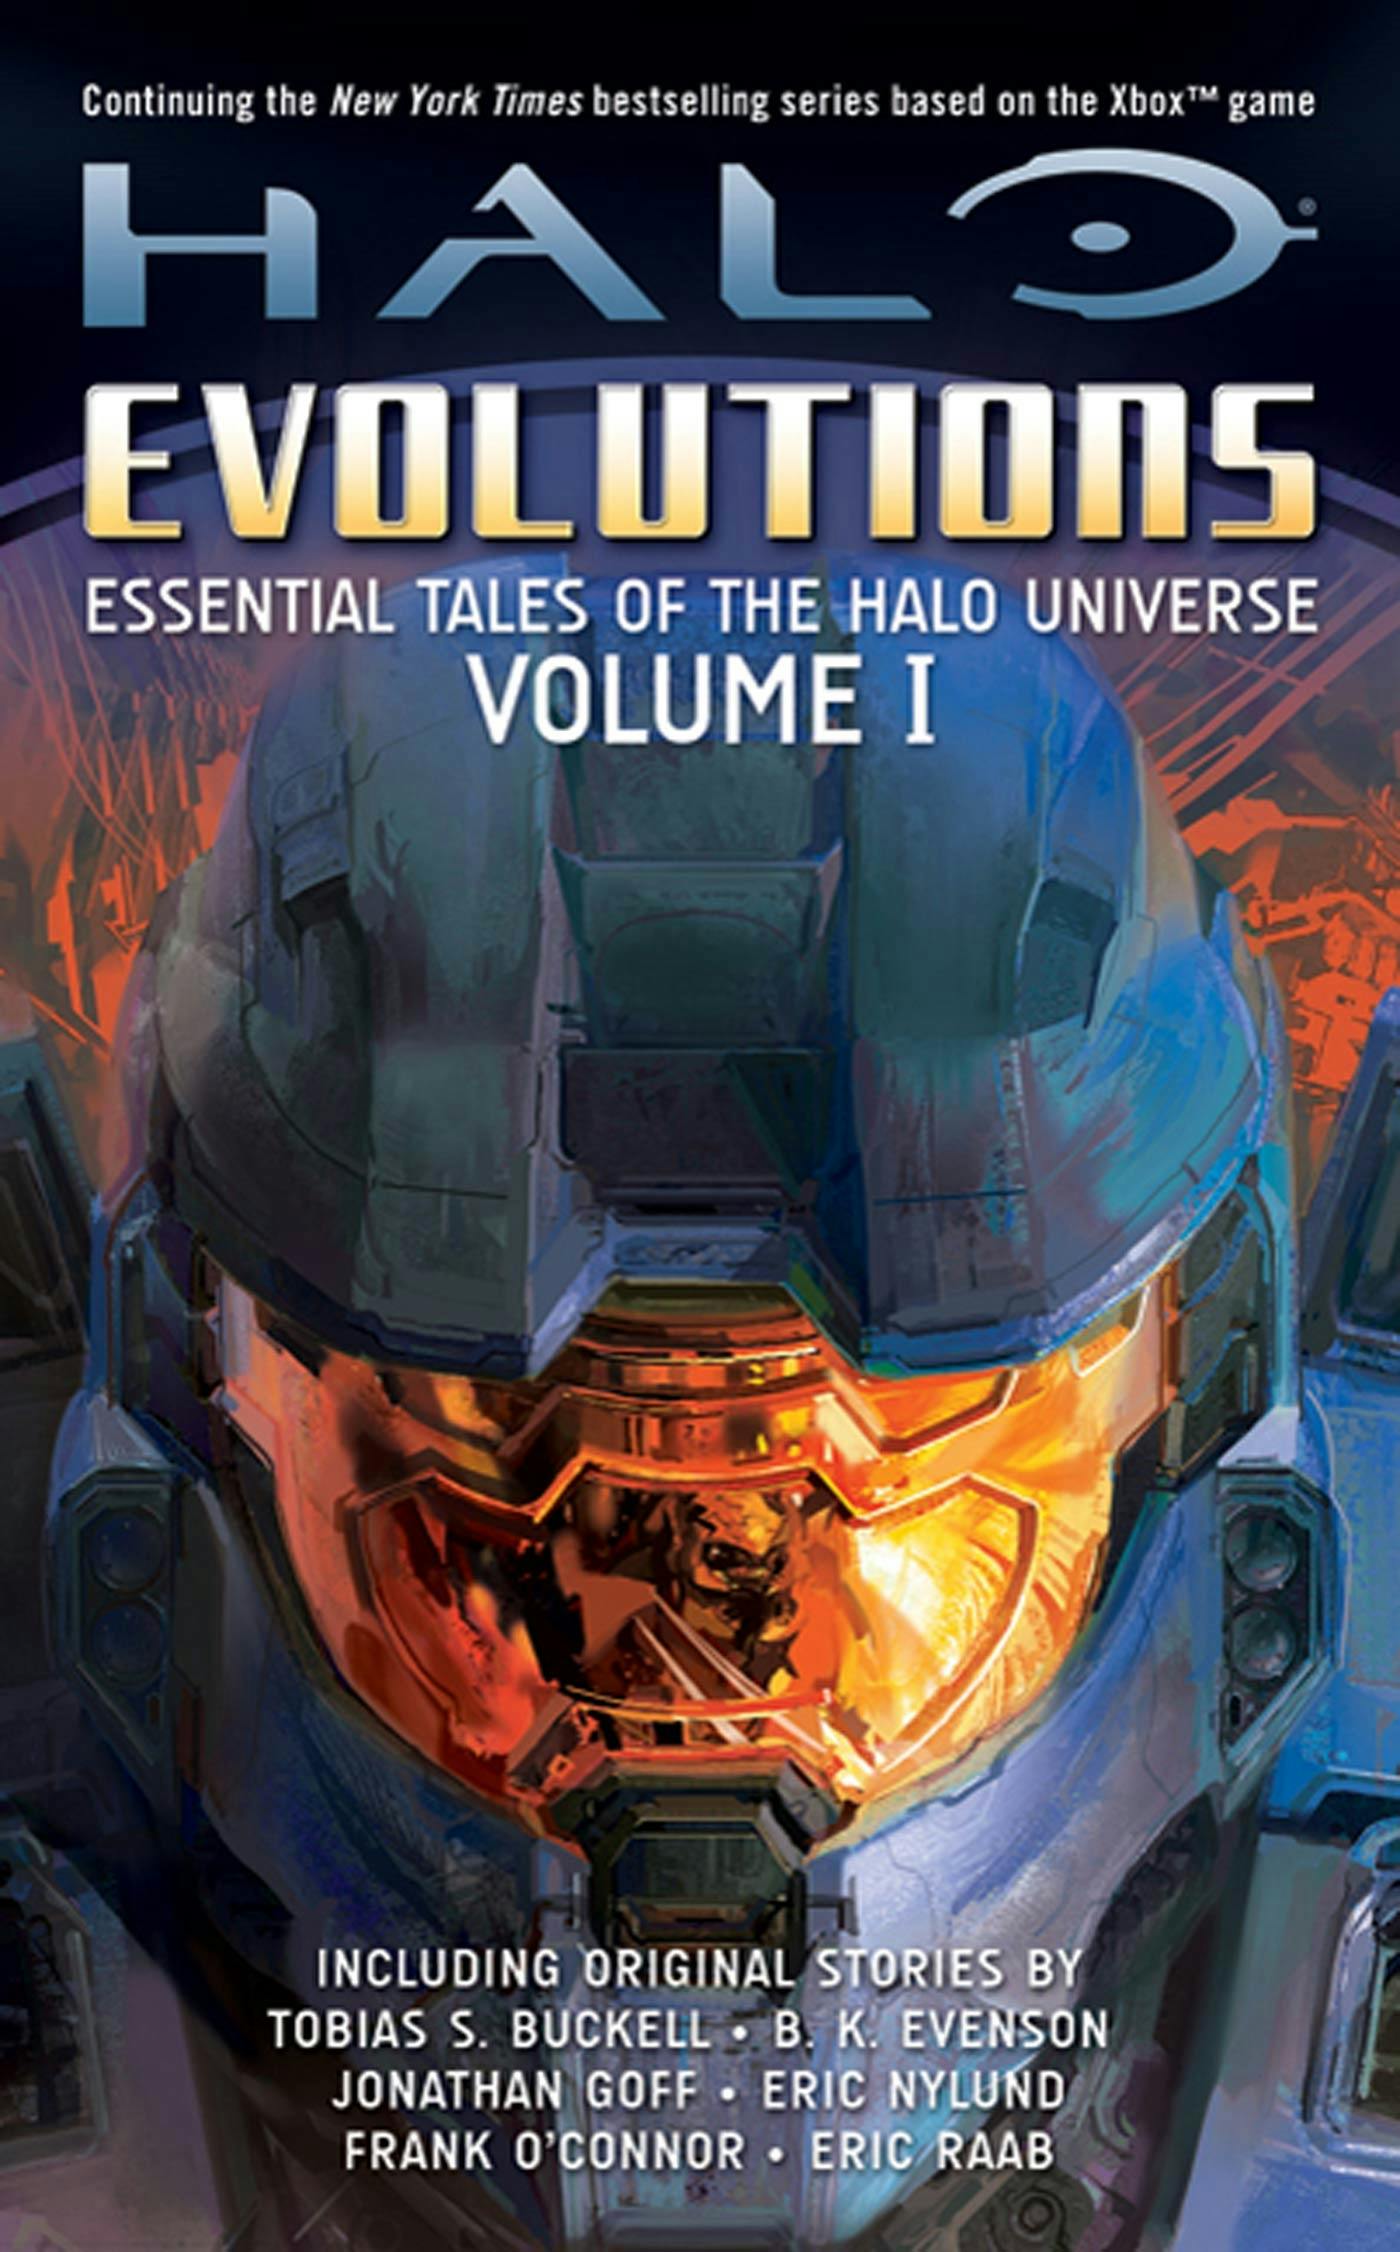 Cover for the book titled as: Halo: Evolutions Volume I